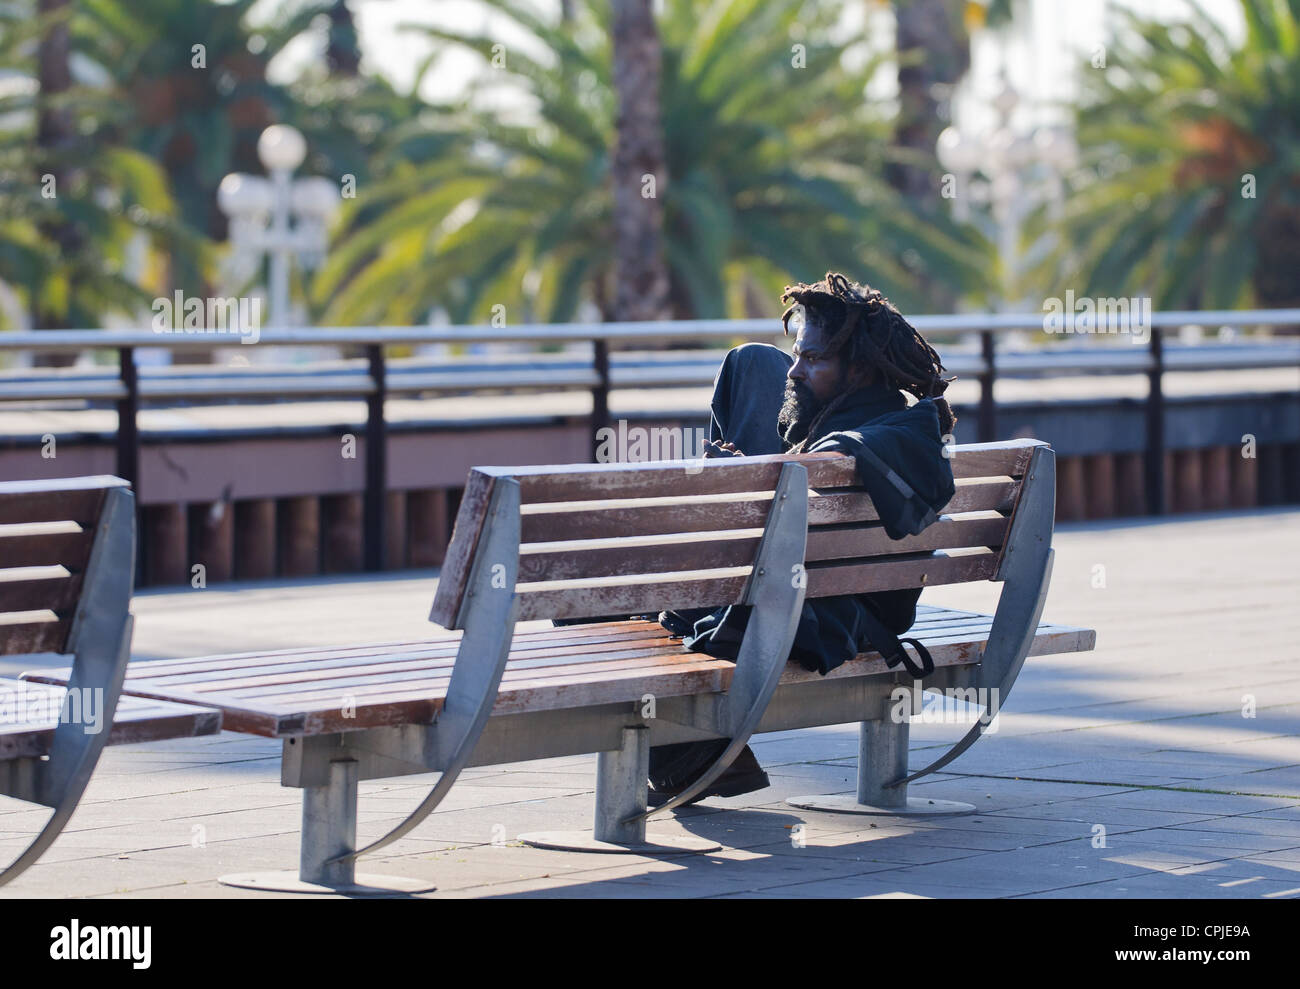 BARCELONA, SPAIN - DECEMBER 2011 : Rasta sitted on a bench. Stock Photo